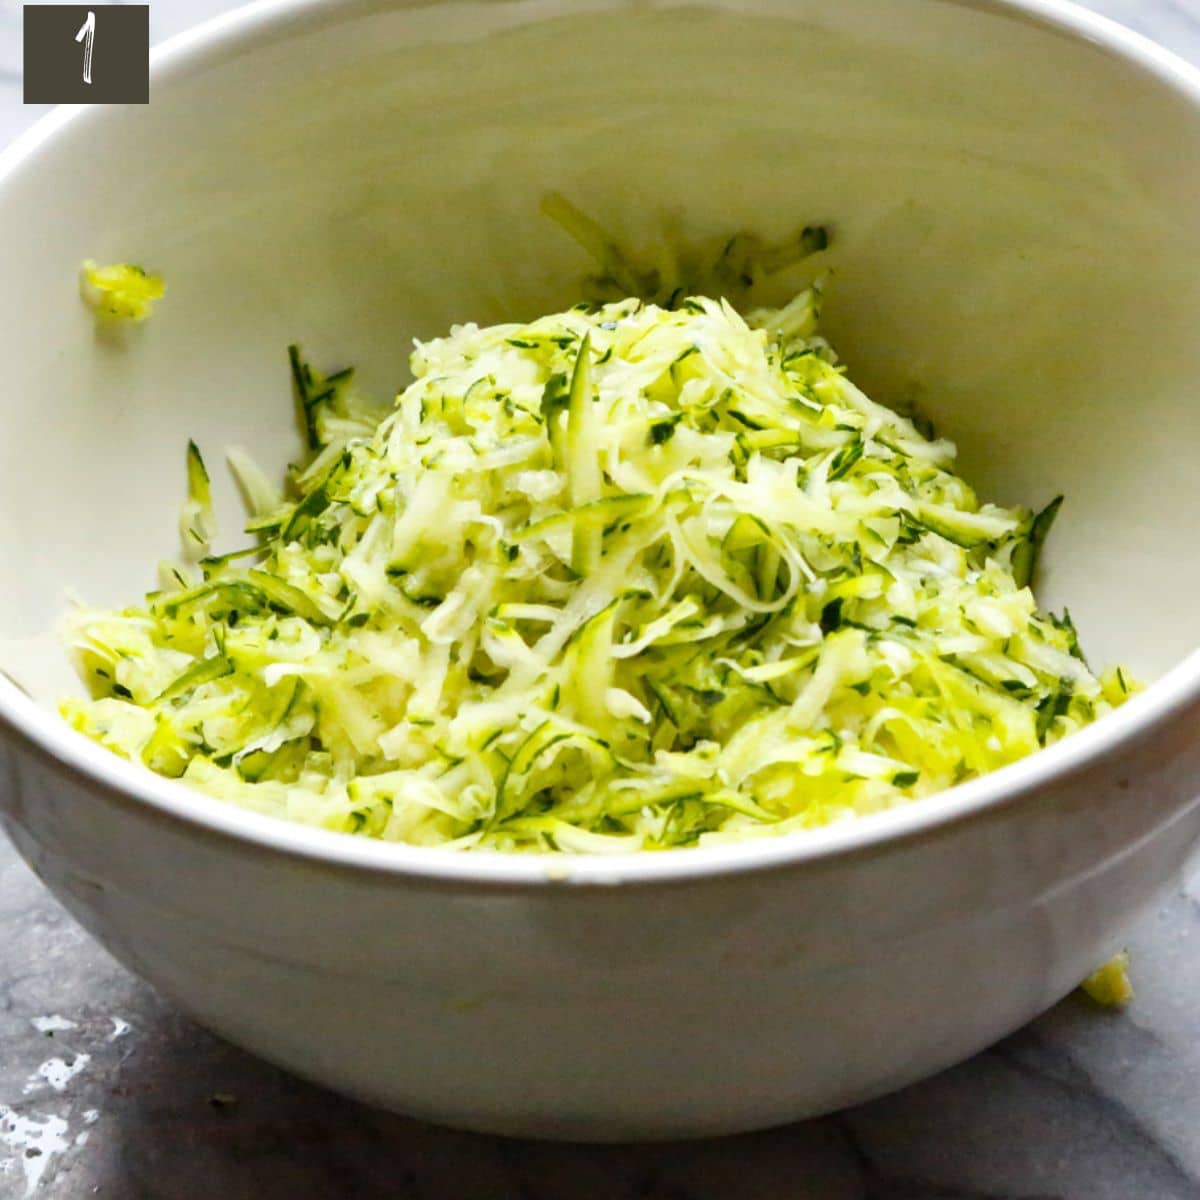 grate zucchini and squeeze out excess moisture using paper towl